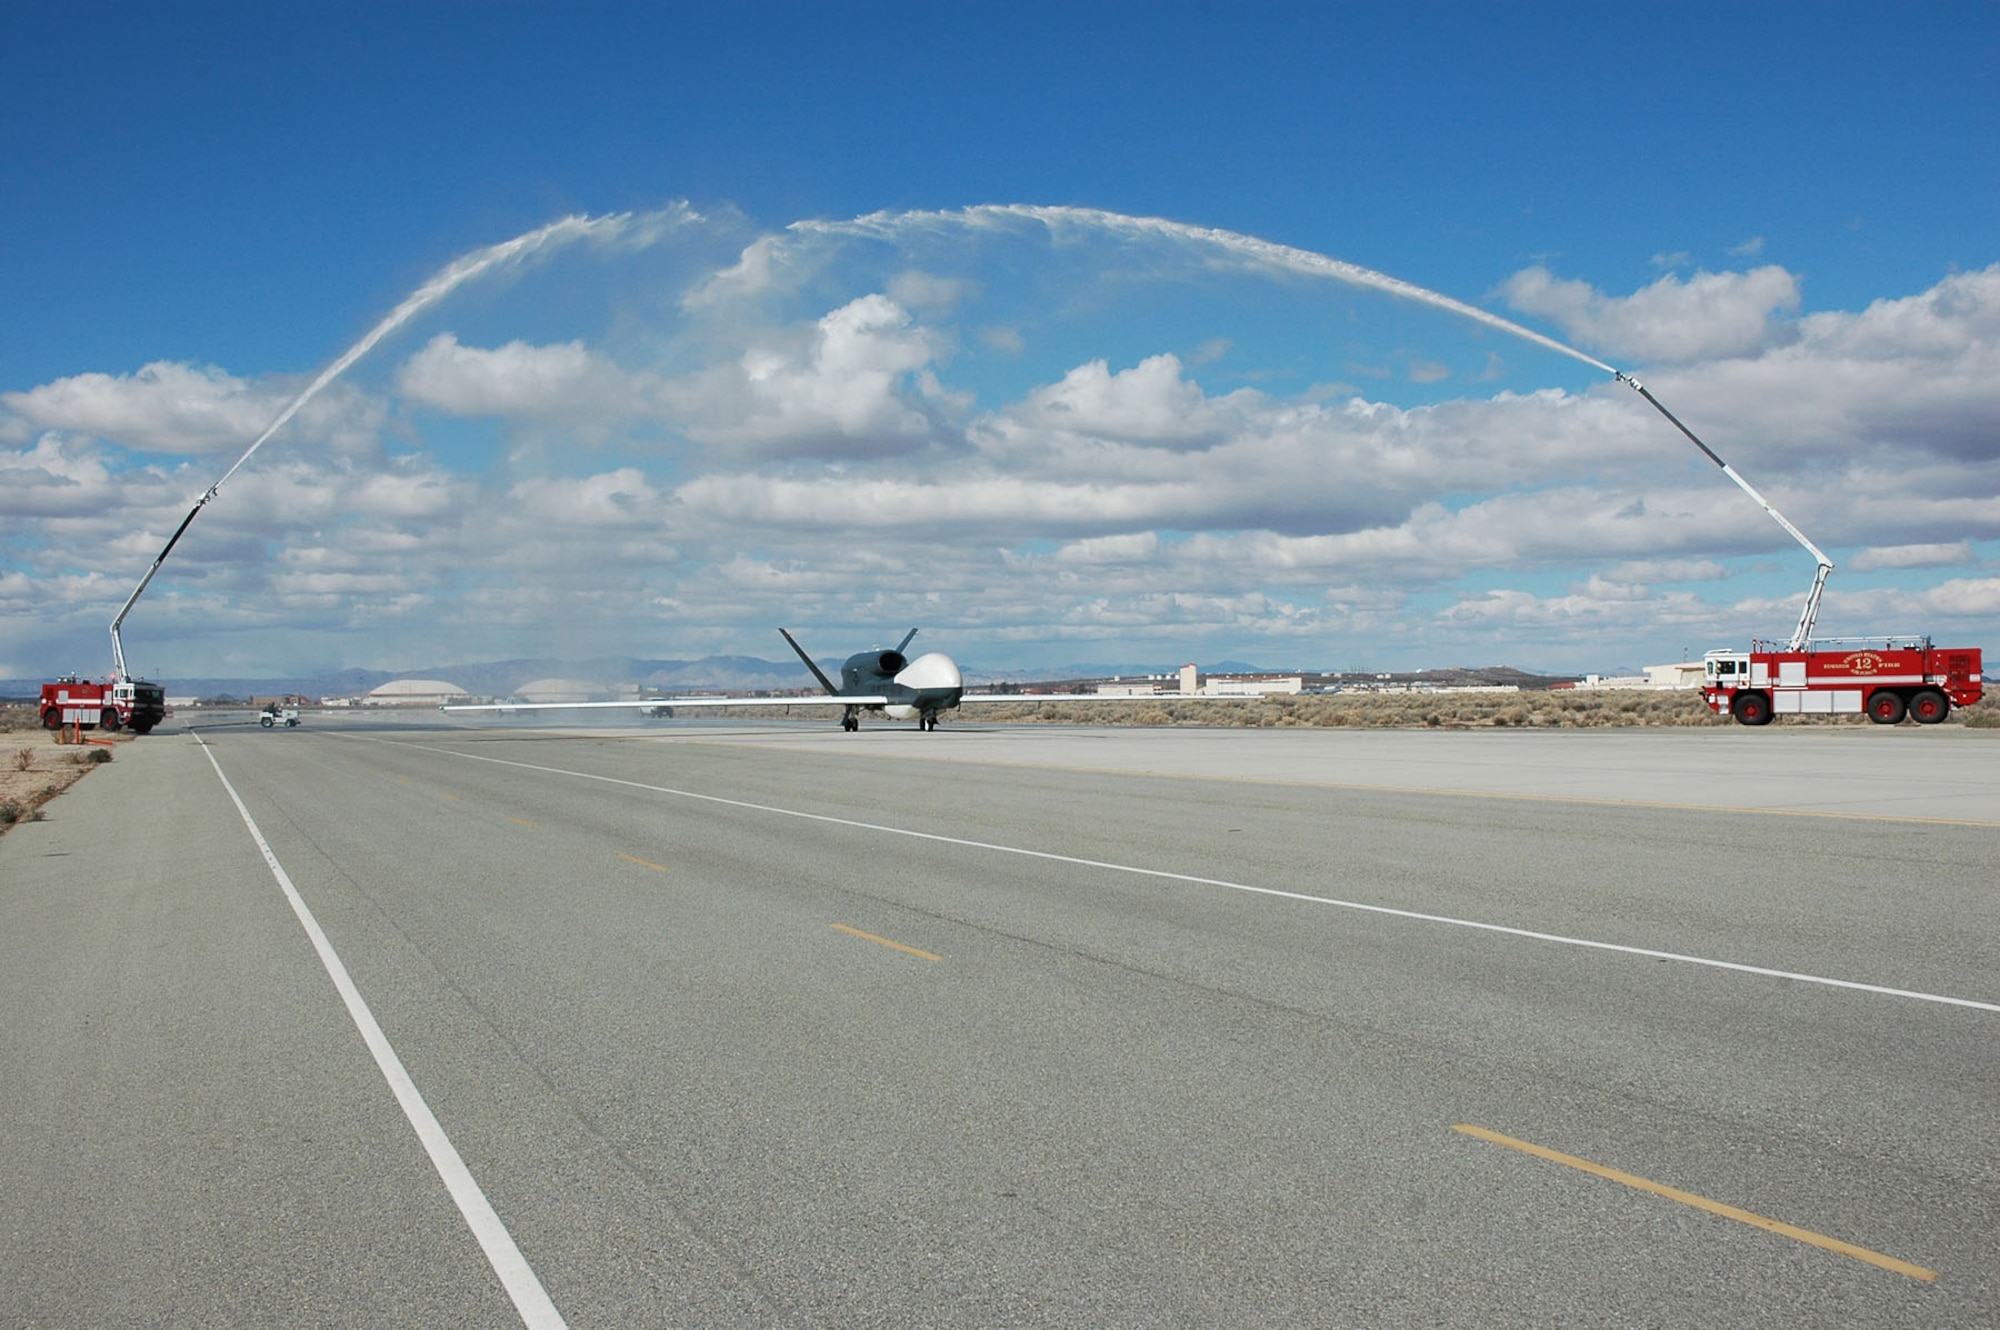 The return of AV-3 to Edwards Air Force Base, Calif., was celebrated with fire trucks shooting streams of water over the aircraft. (Photo courtesy of Mo Pourmand)